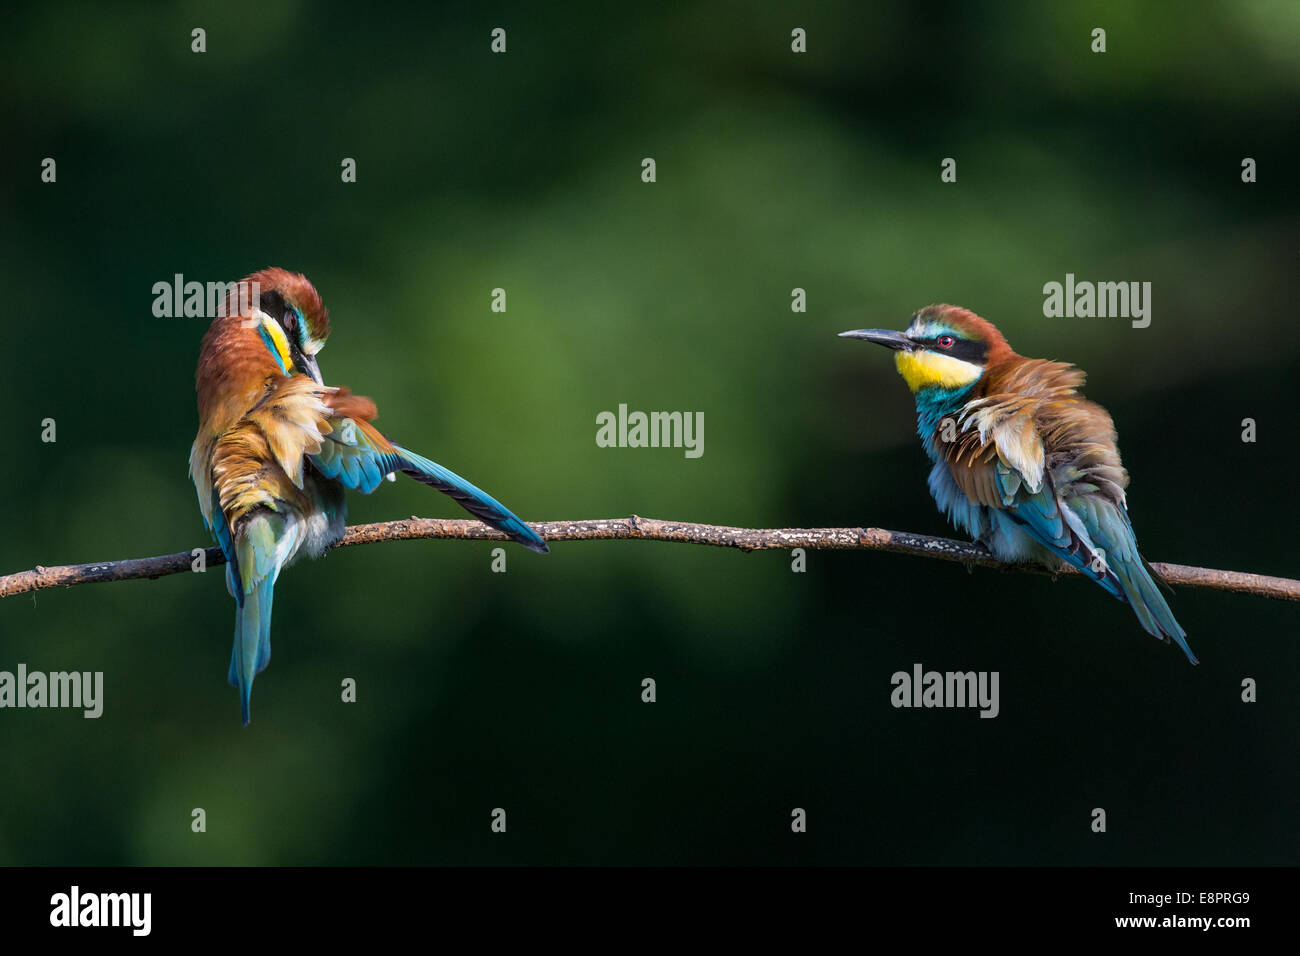 Two European Bee-eaters (Merops apiaster) preening on a branch Stock Photo